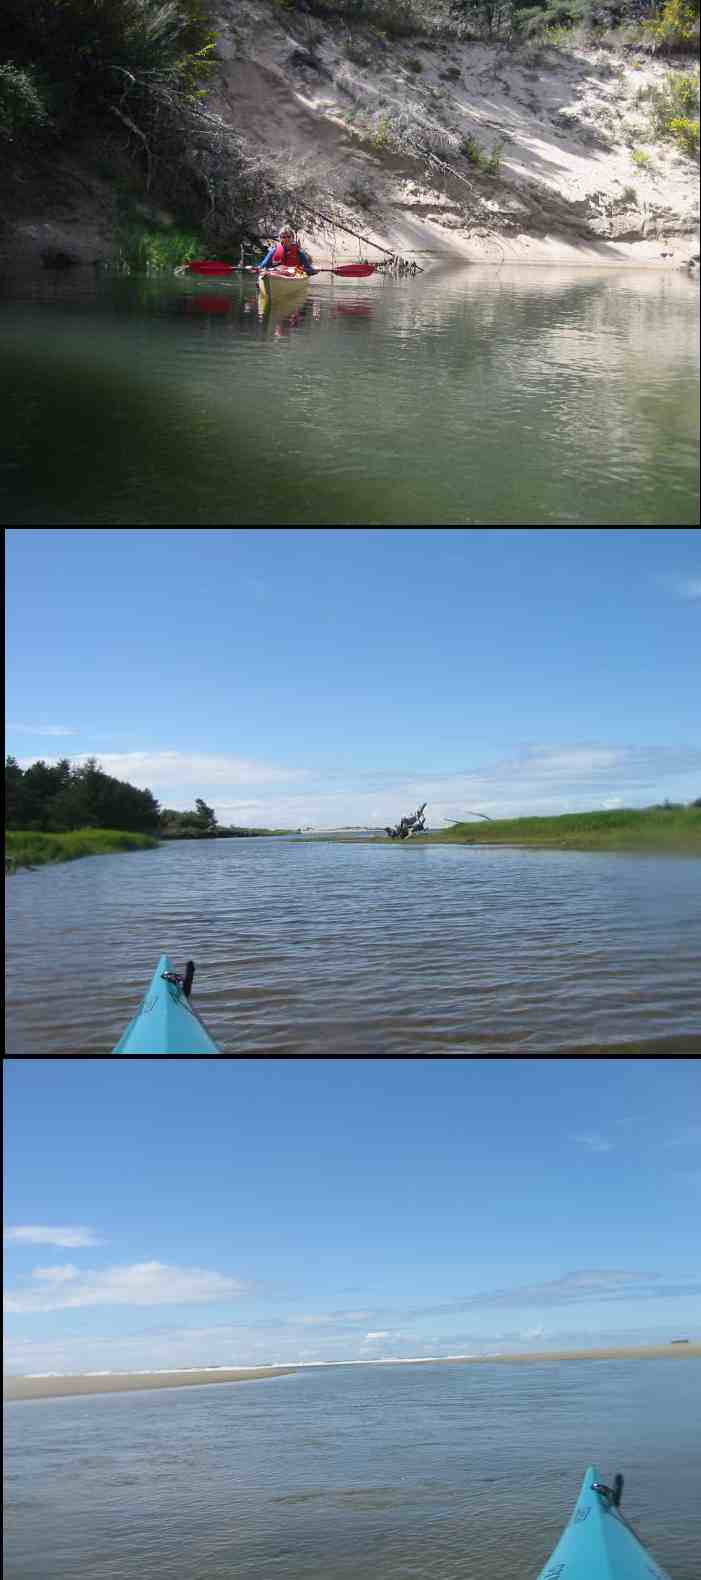 A picture named SiltcoosRiverKayaking.jpg